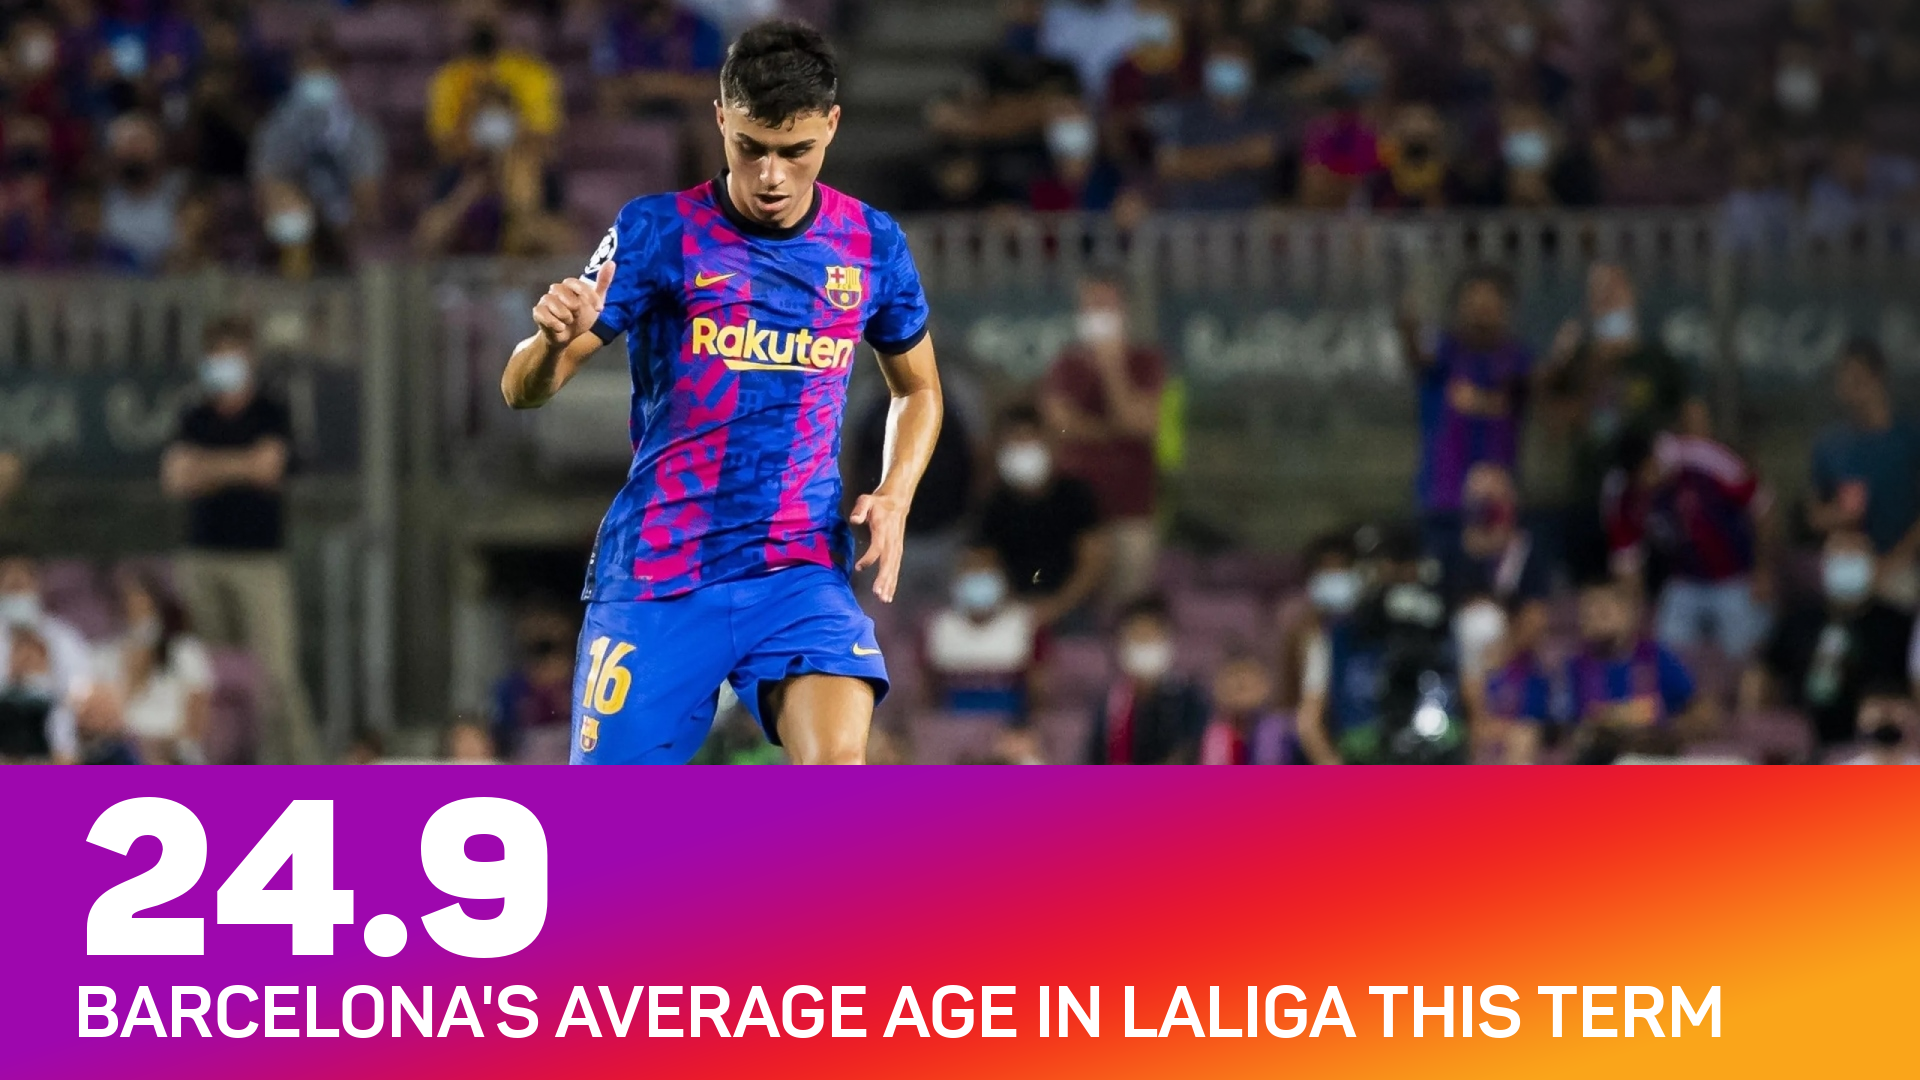 Barcelona's average age in LaLiga this term is among the youngest